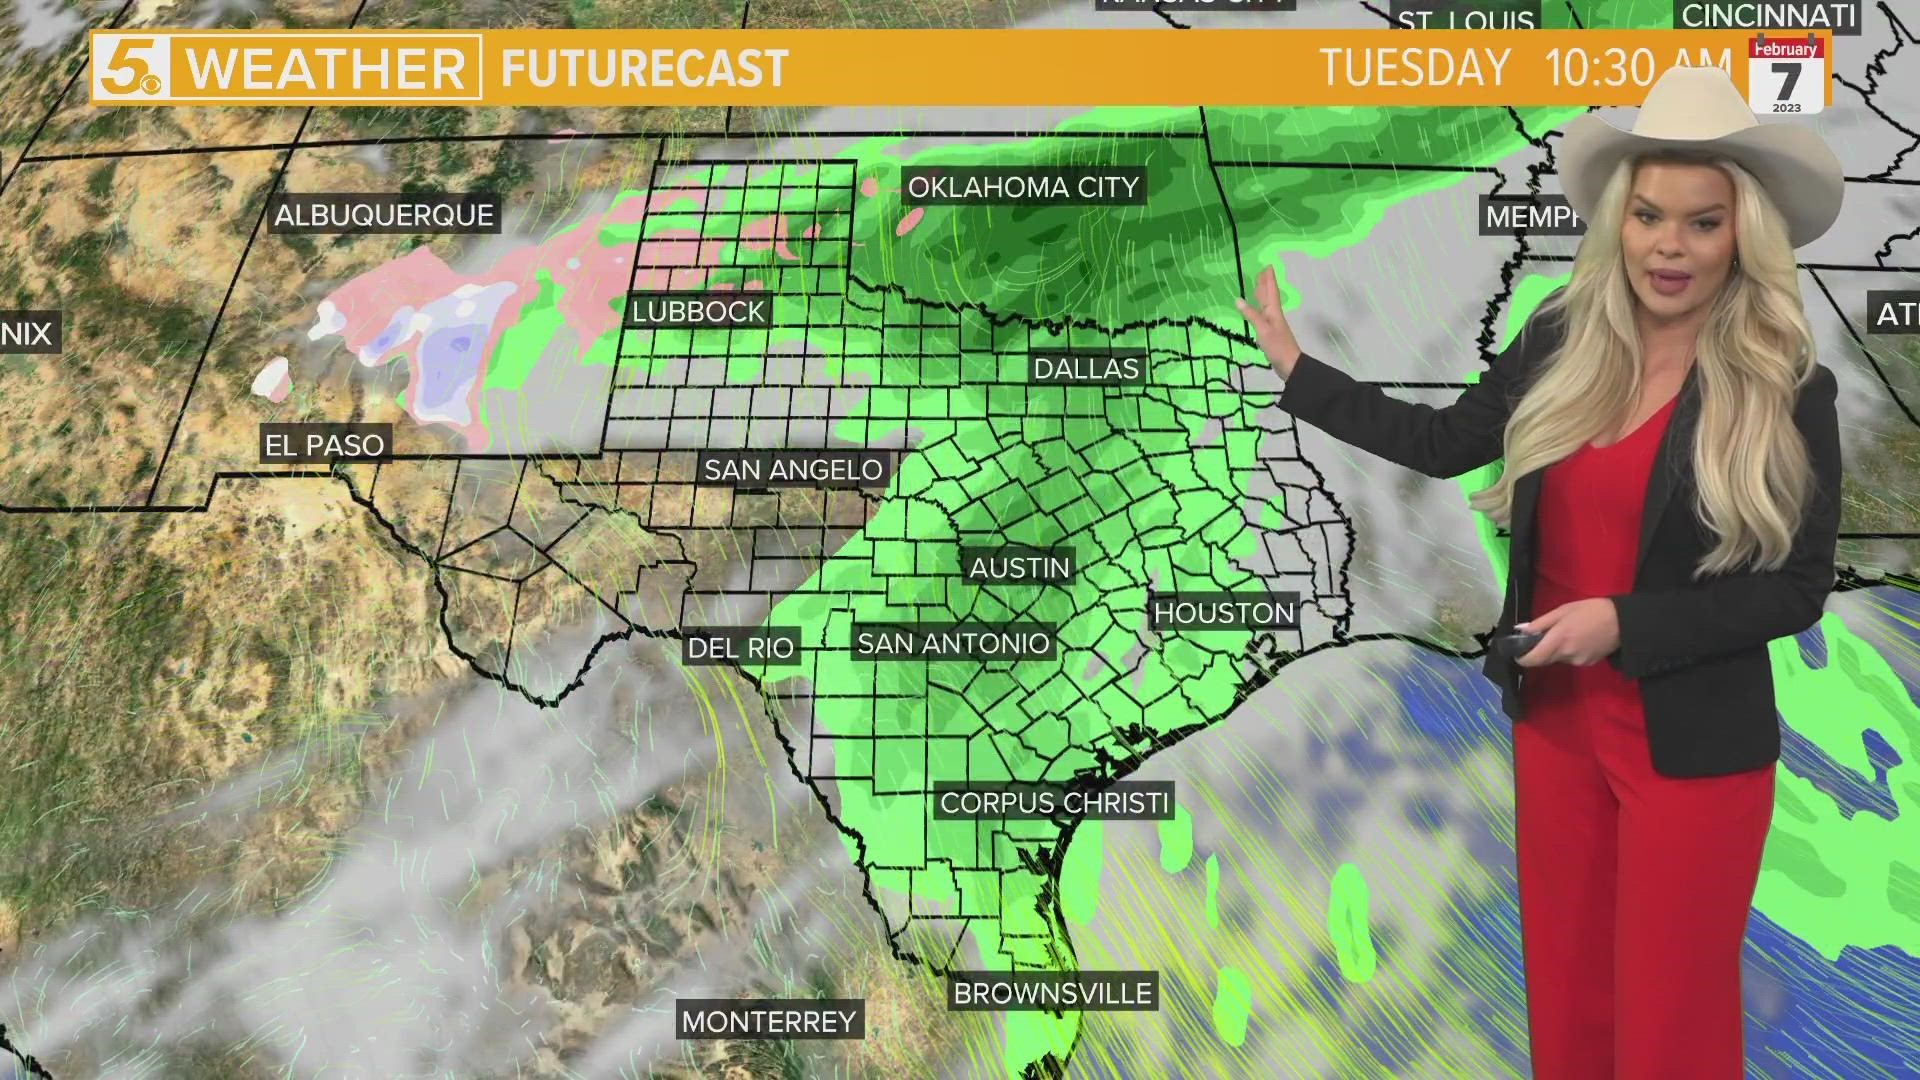 KENS 5's Maggie Laughlin has the full forecast on Friday, February 2.